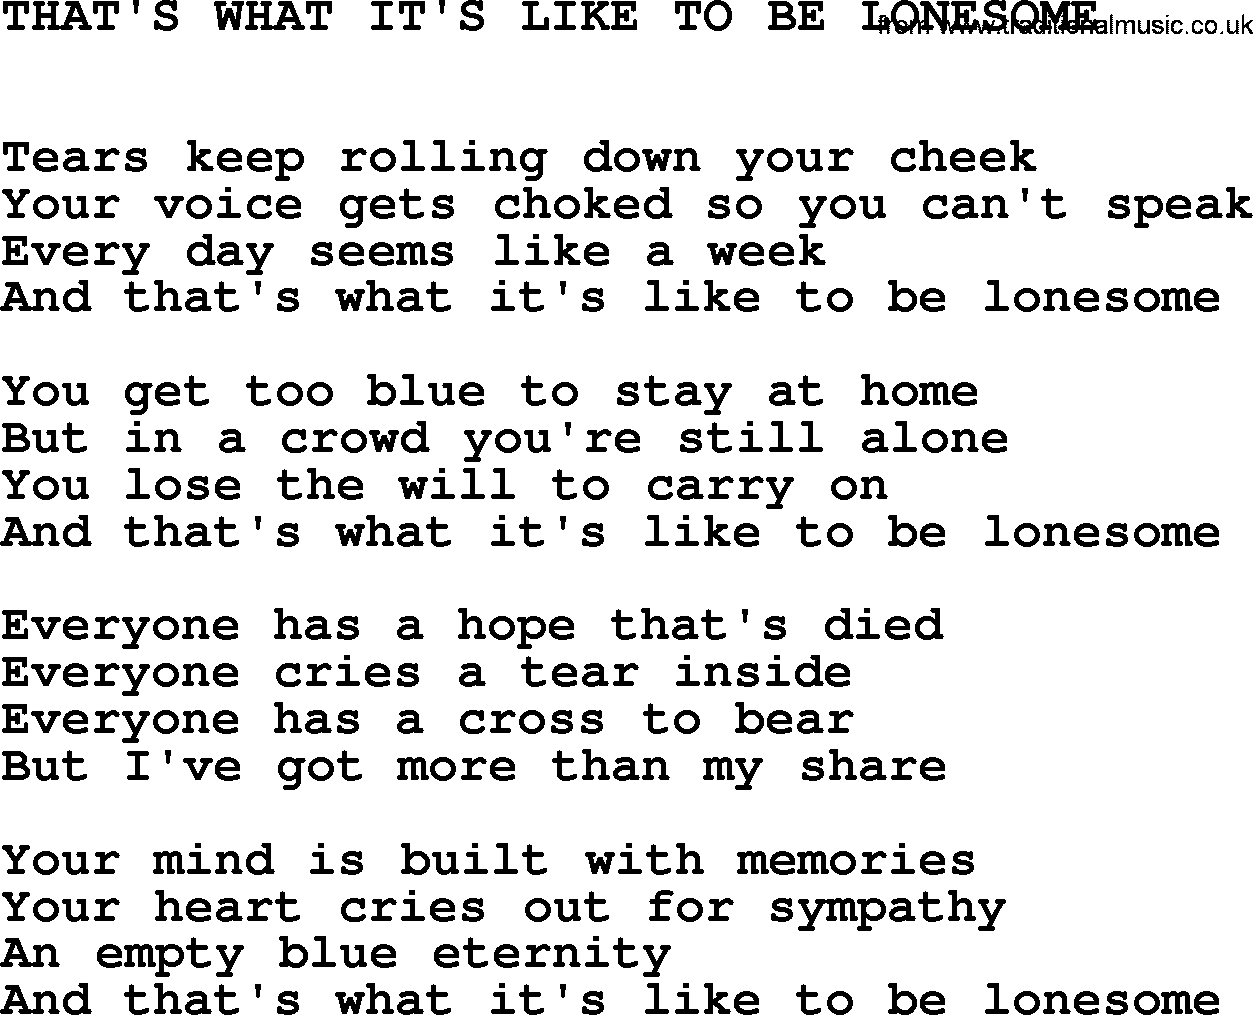 Johnny Cash song That's What It's Like To Be Lonesome.txt lyrics